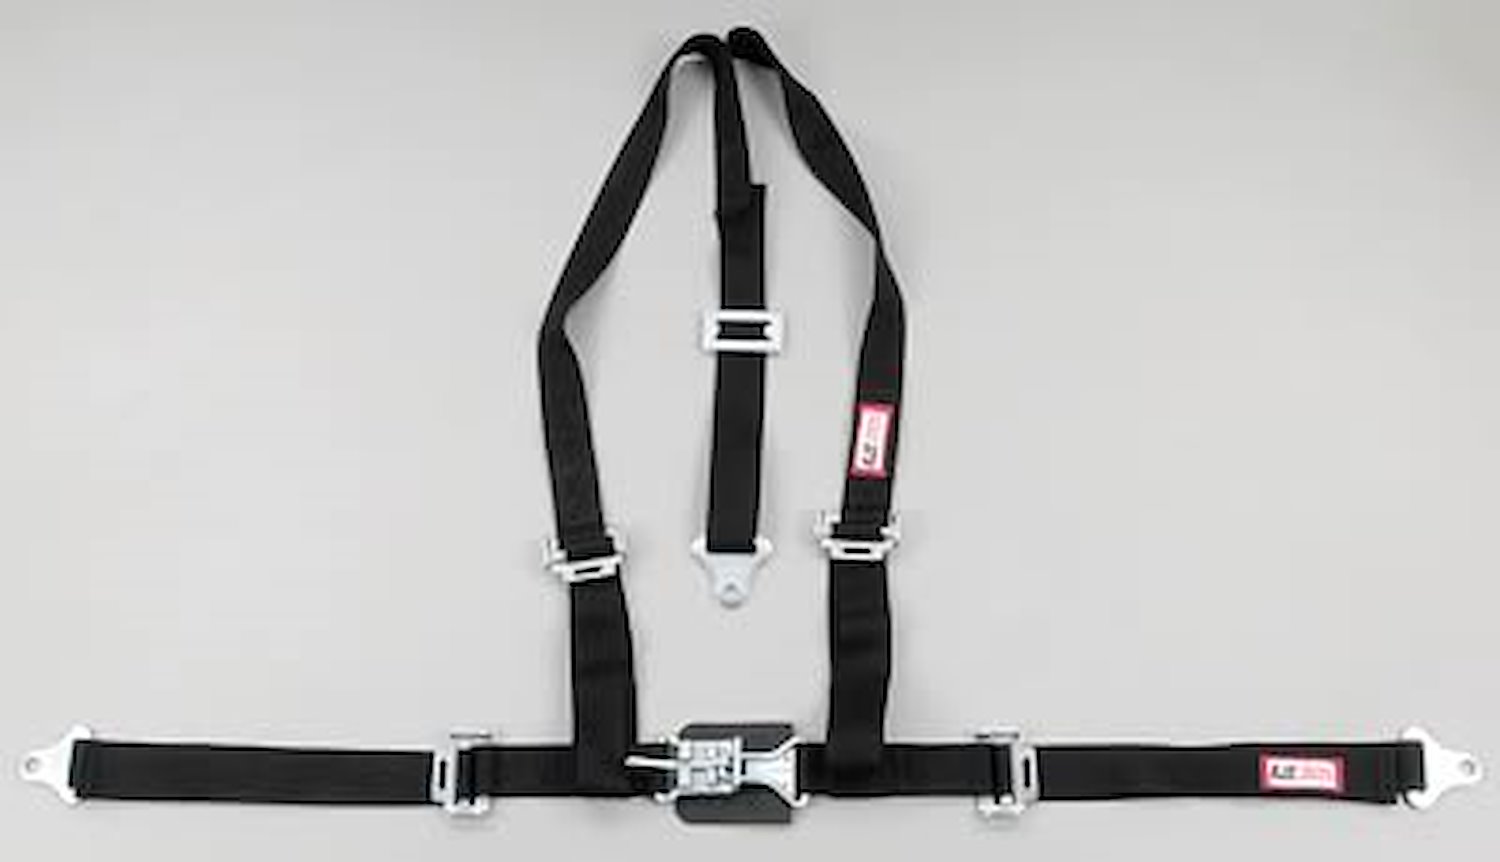 NON-SFI L&L HARNESS 2 PULL DOWN Lap Belt w/Adjuster SNAP 2 S.H. Y FLOOR MOUNT w/STERNUM STRAP WRAP/SNAP HOT PINK